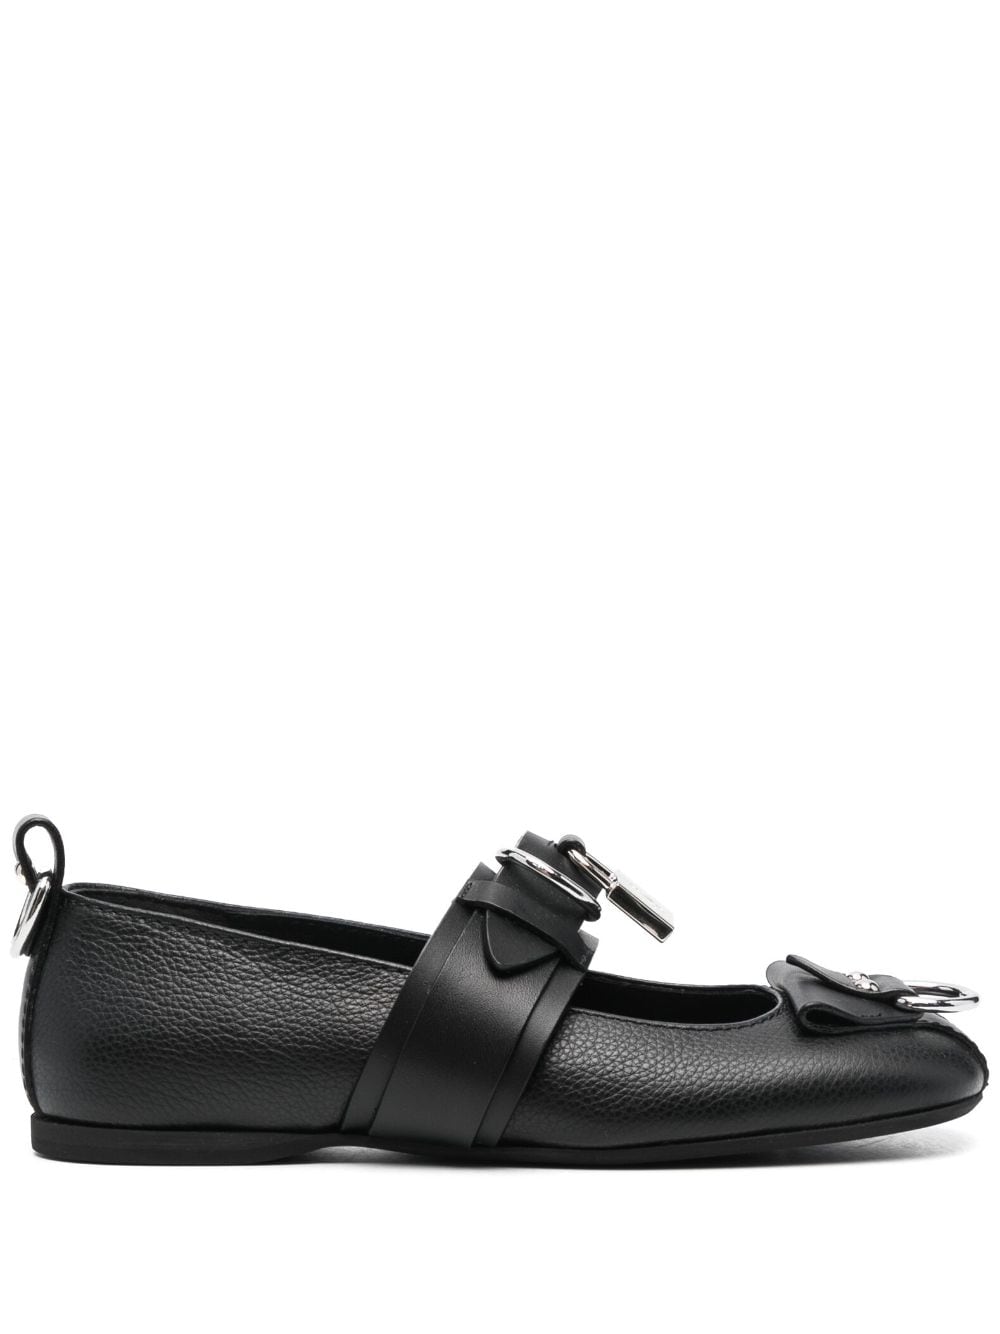 JW Anderson buckle-detail leather ballerina shoes - Black